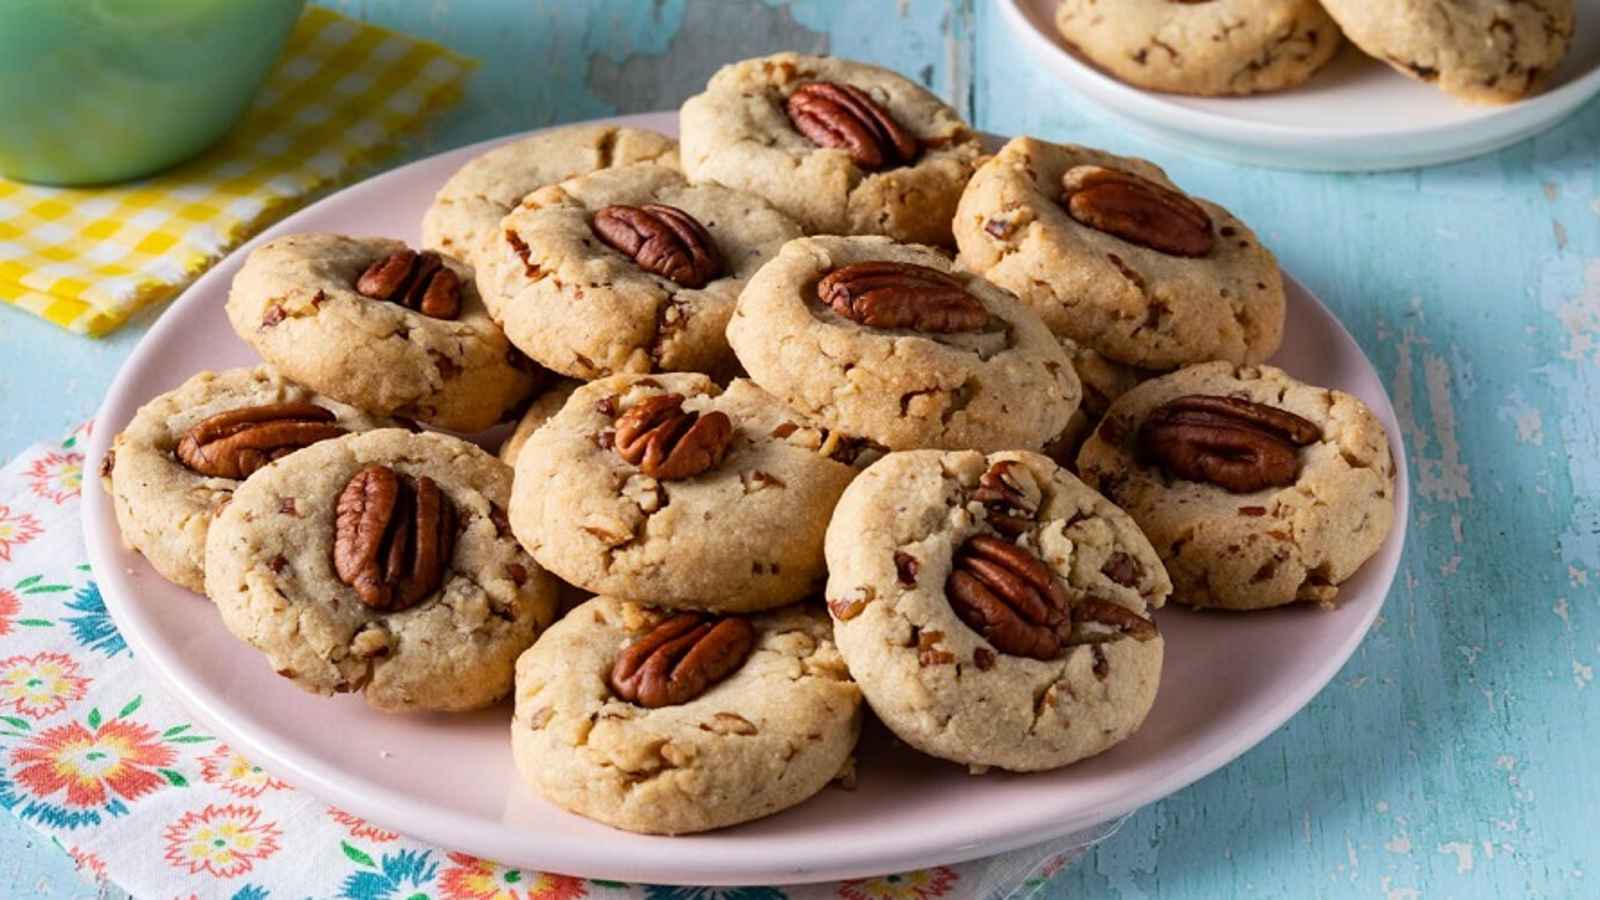 National Pecan Sandies Day 2023: Date, History, Facts about Pecans